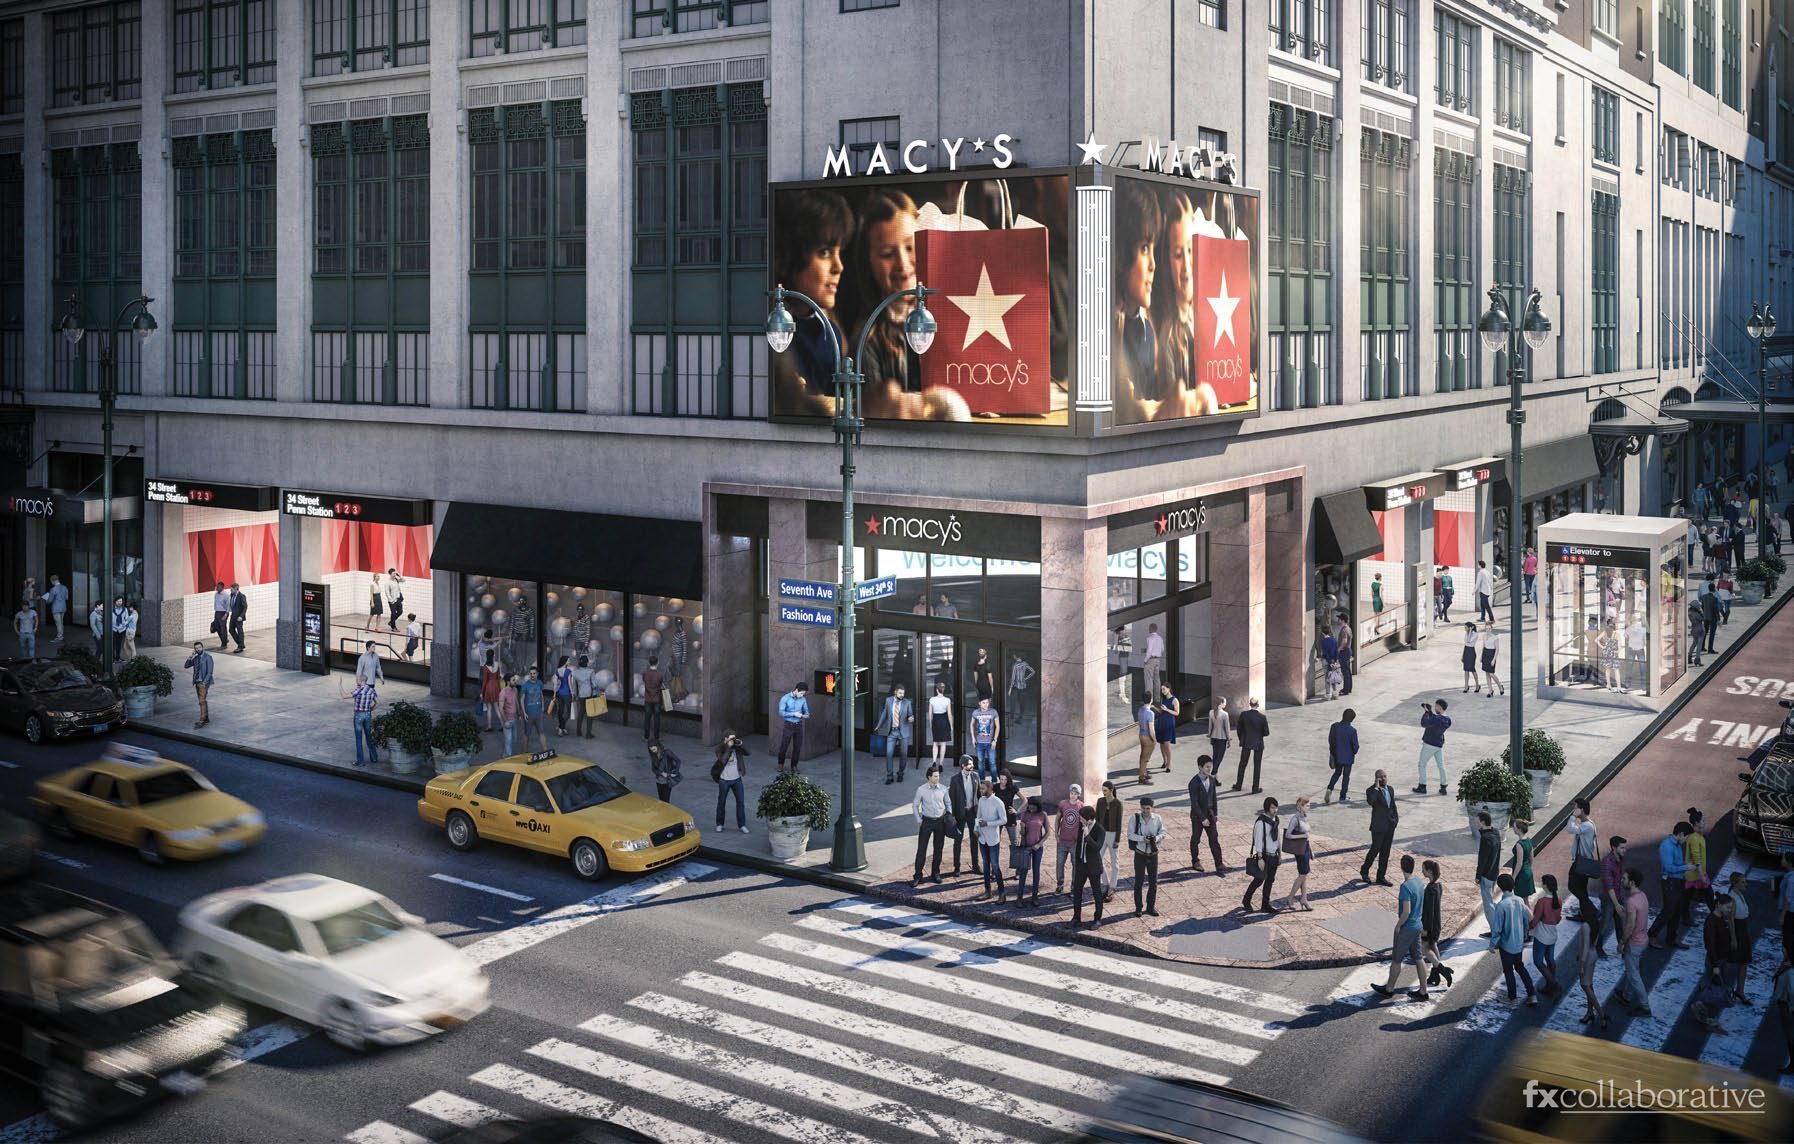 For Macy's, a Makeover on 34th Street - The New York Times